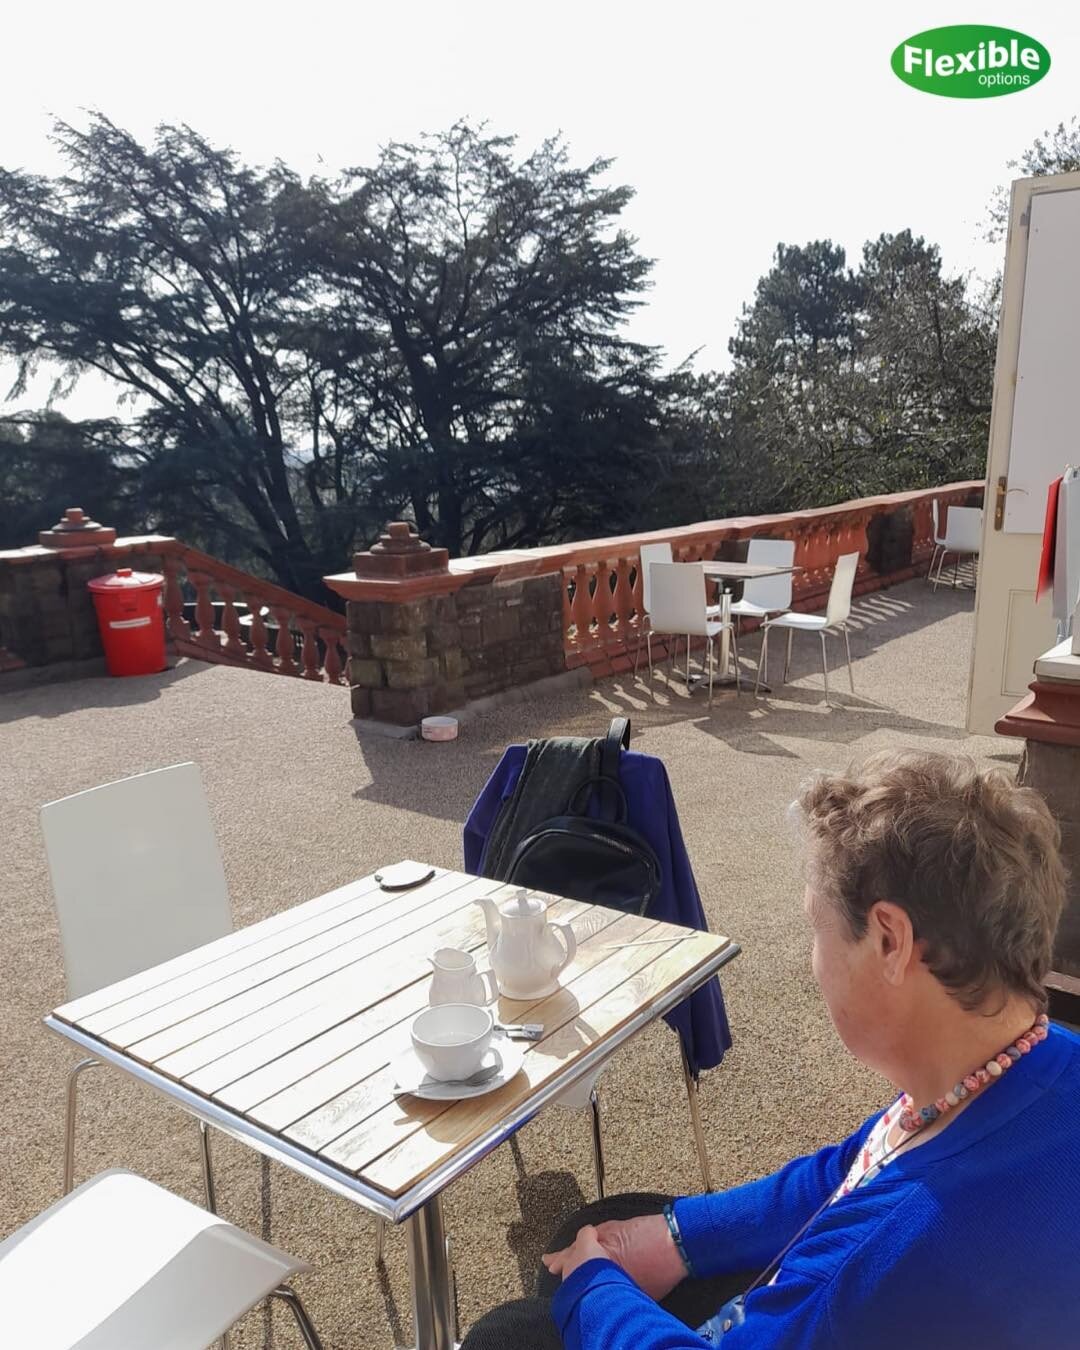 Ruth had a smashing visit to the cafe at Belle Vue park. Such great views when you are there. 

#cafe #cafelife #cupoftea #learningdisabilties